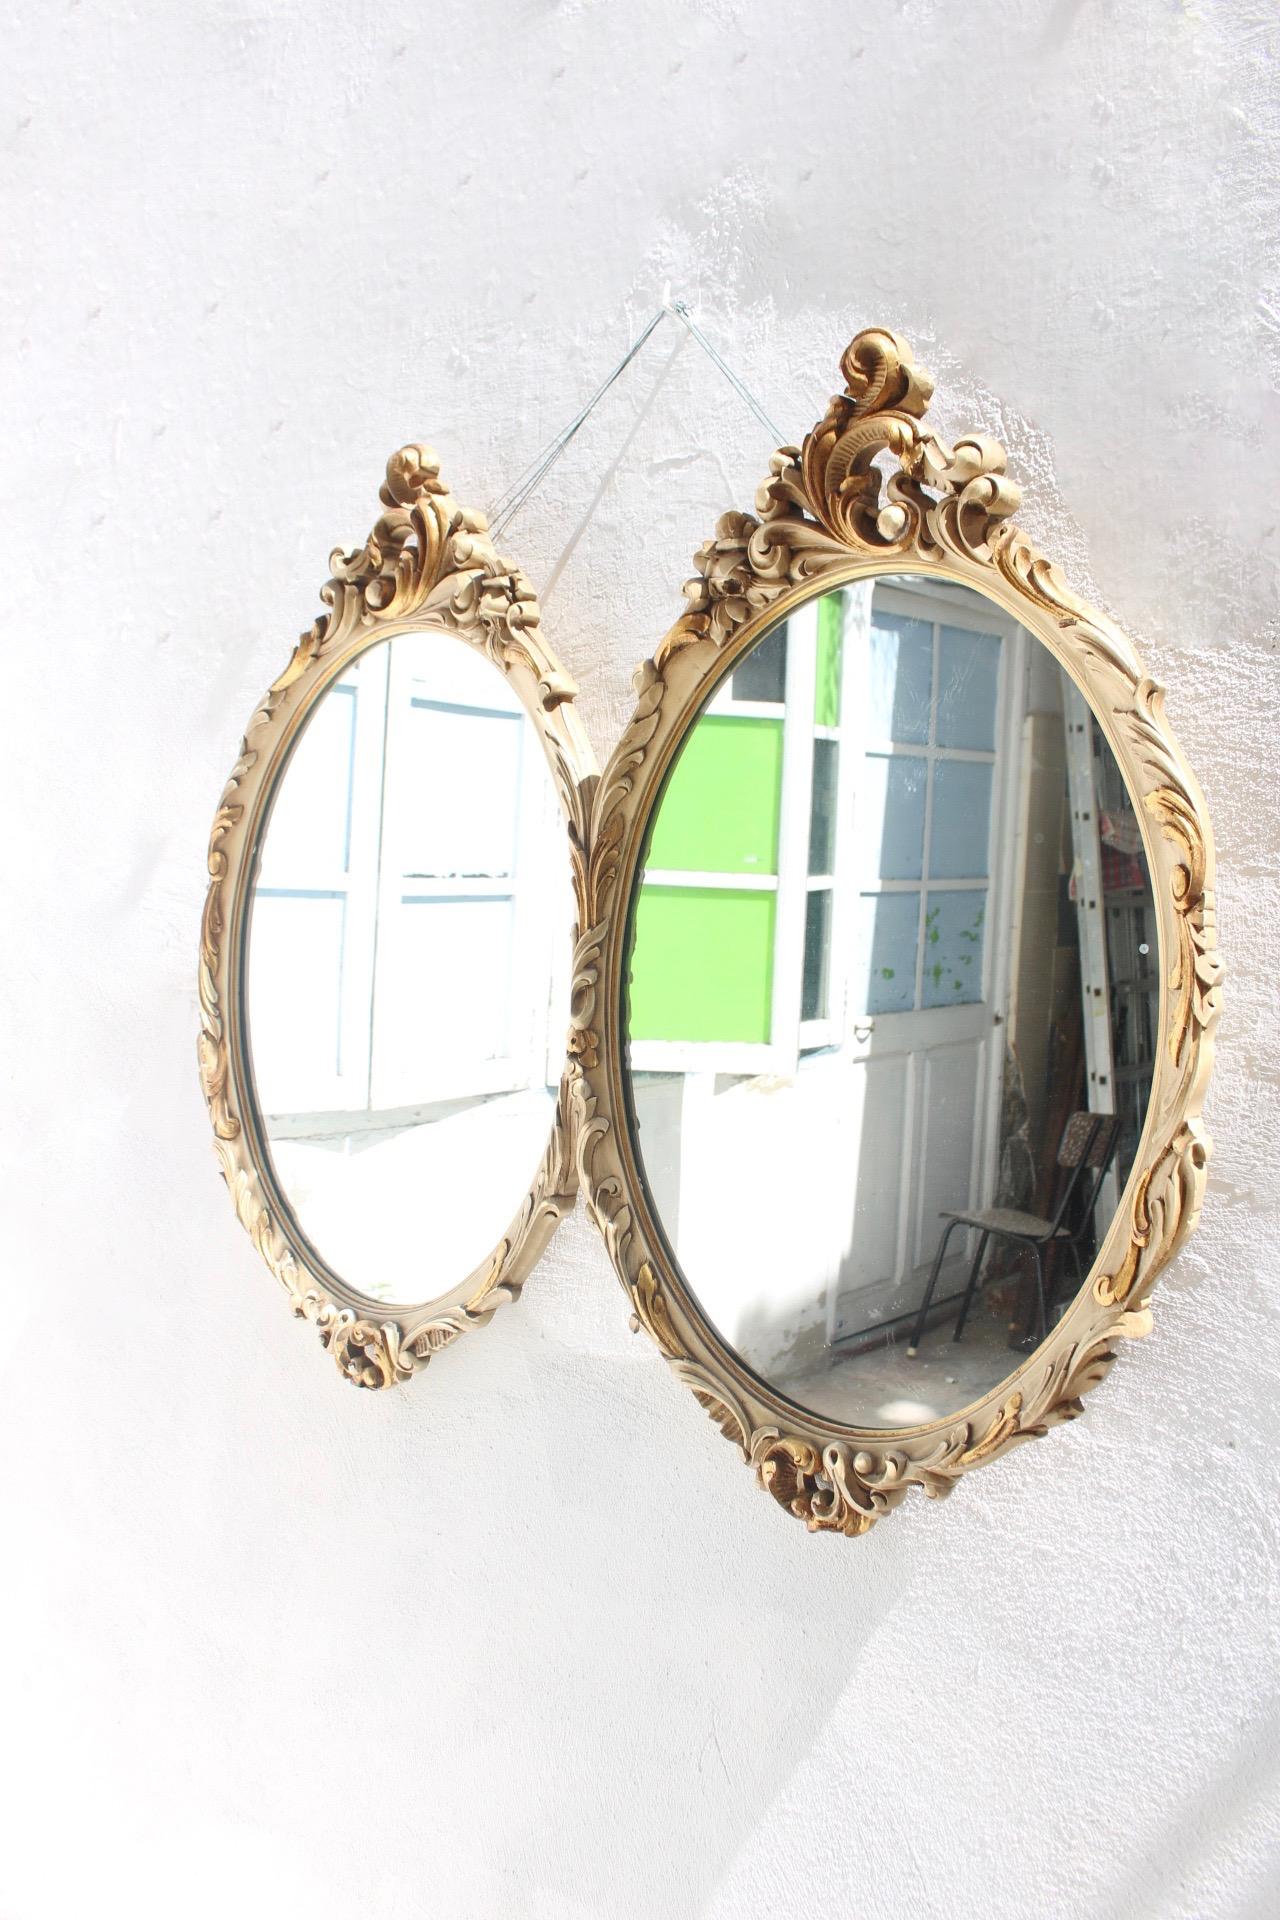 Neoclassical Revival Double Oval White Wood Mirror by Mariano García, 1960s For Sale 8